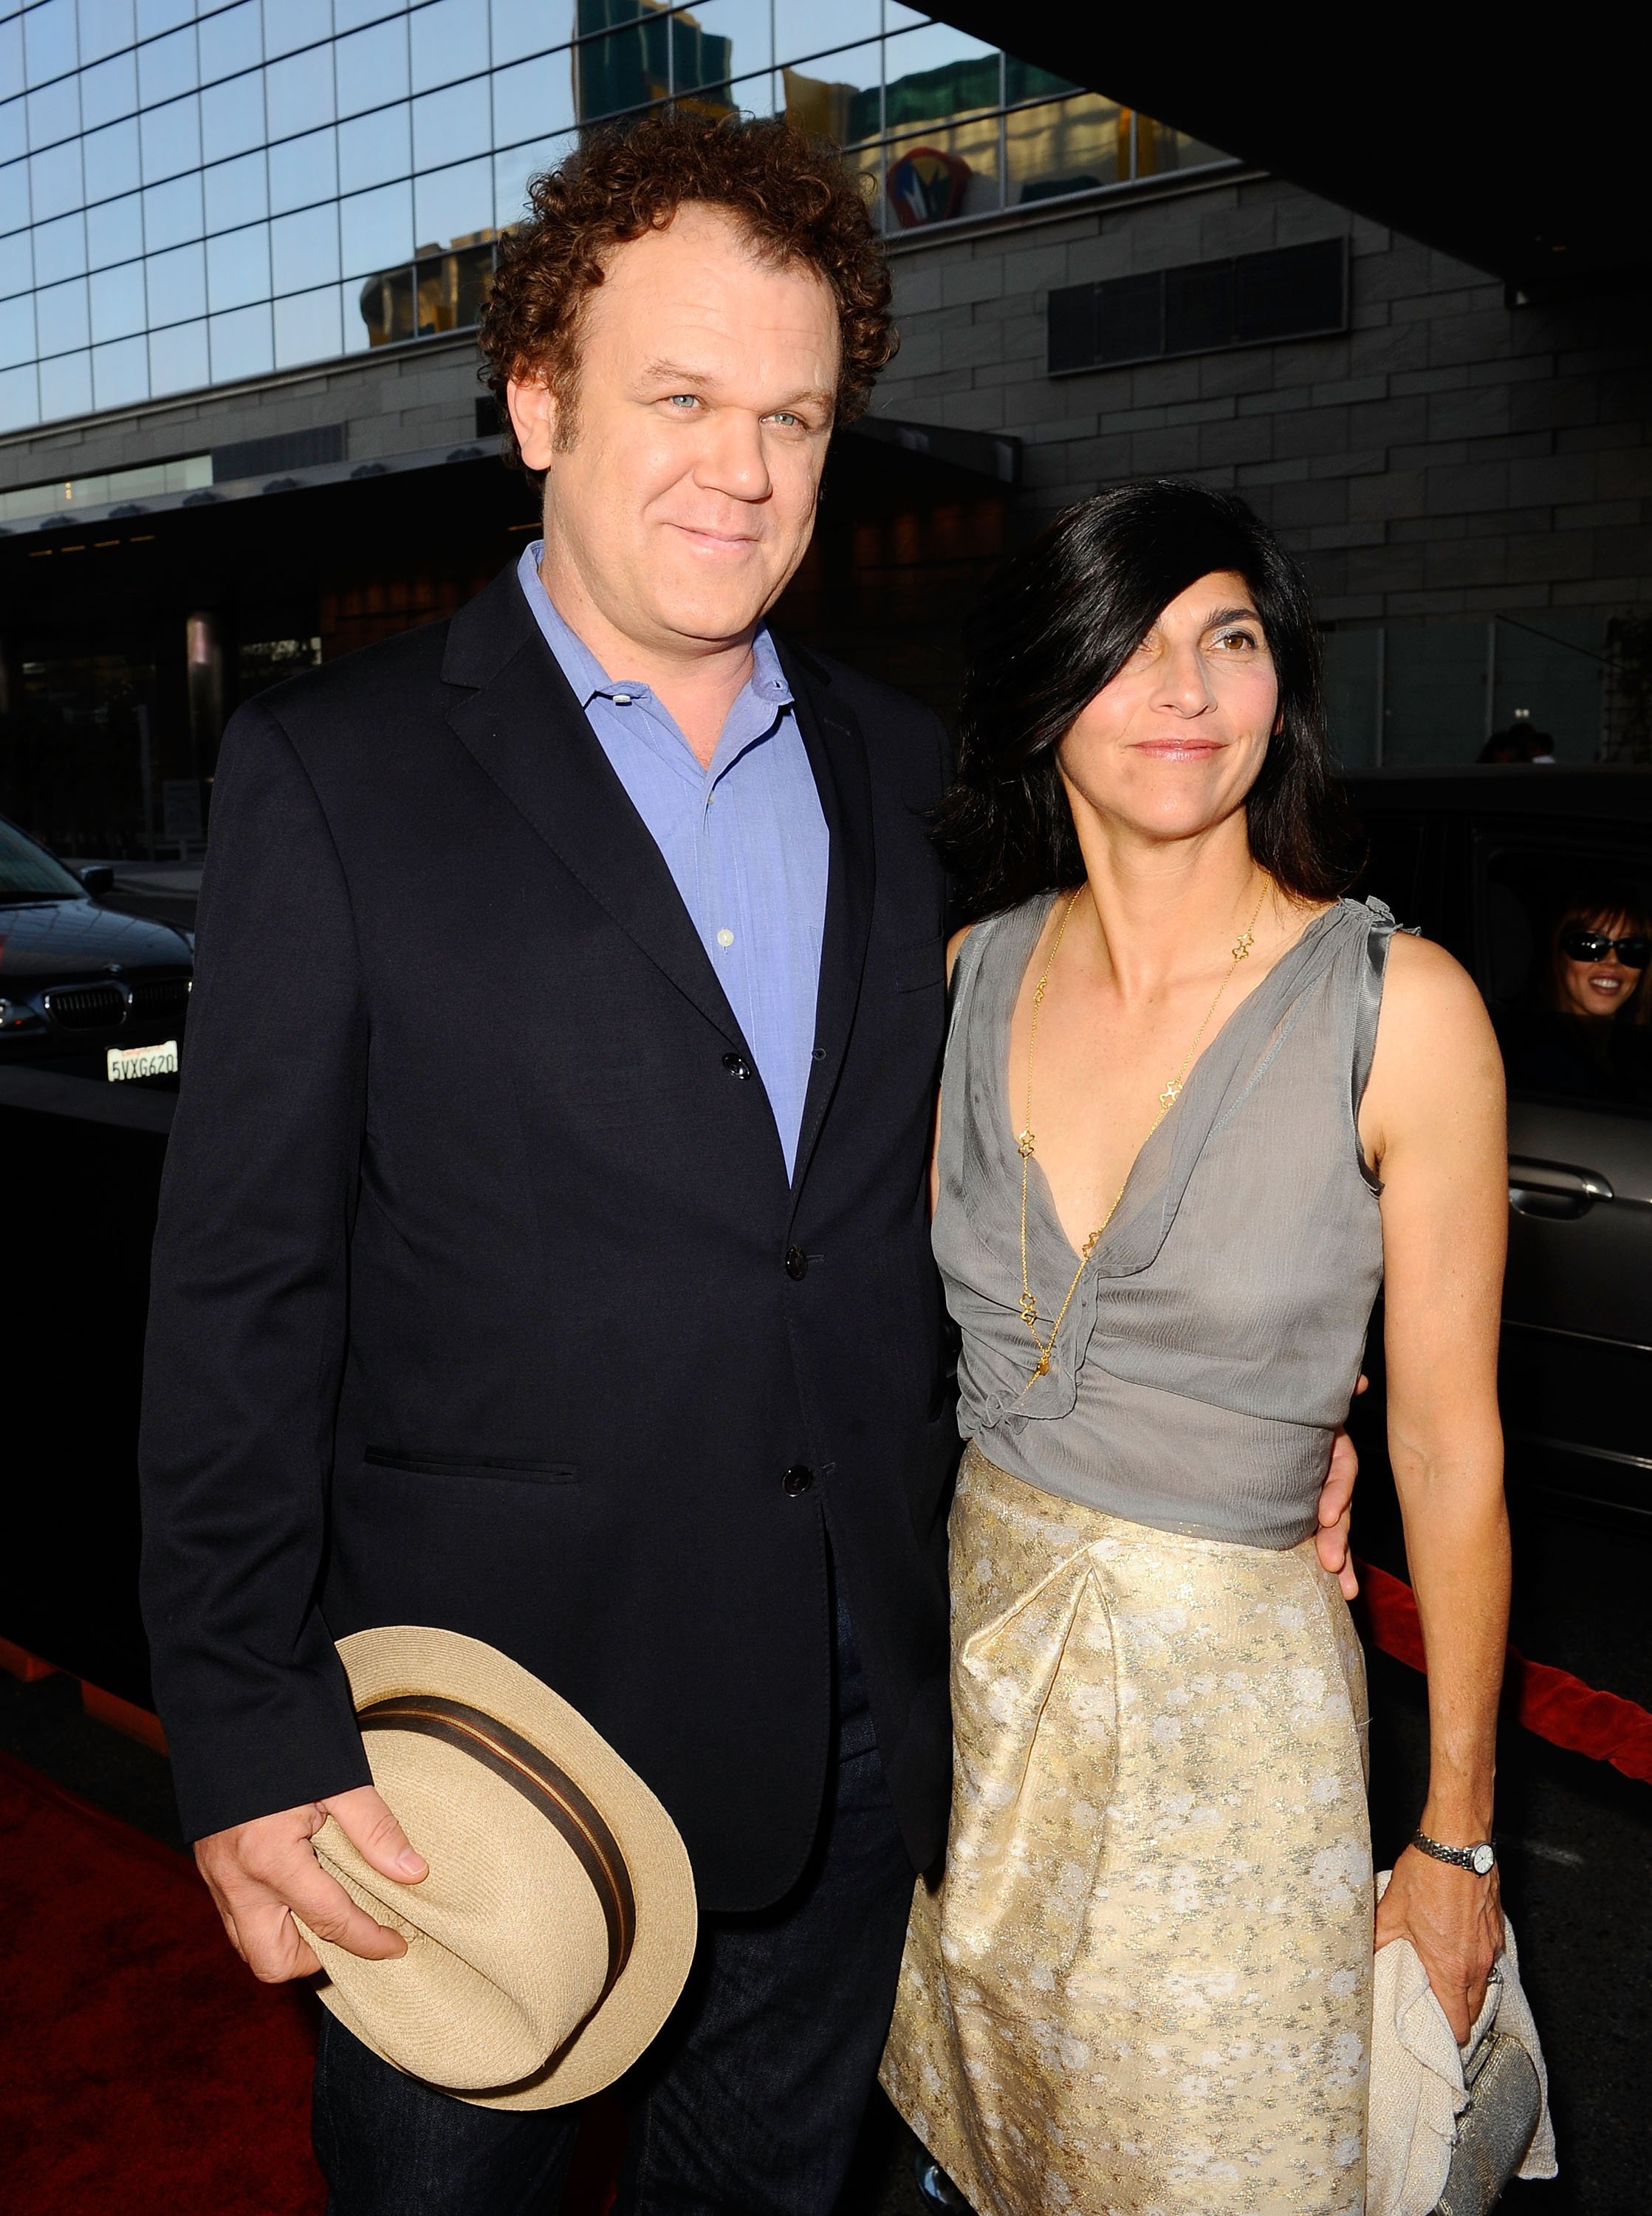 Actor John C. Reilly and wife Alison Dickey attend the "Cyrus" gala screening during the 2010 Los Angeles Film Festival held at Regal Cinemas at LA Live Downtown on June 18, 2010 in Los Angeles, California. | Source: Getty Images